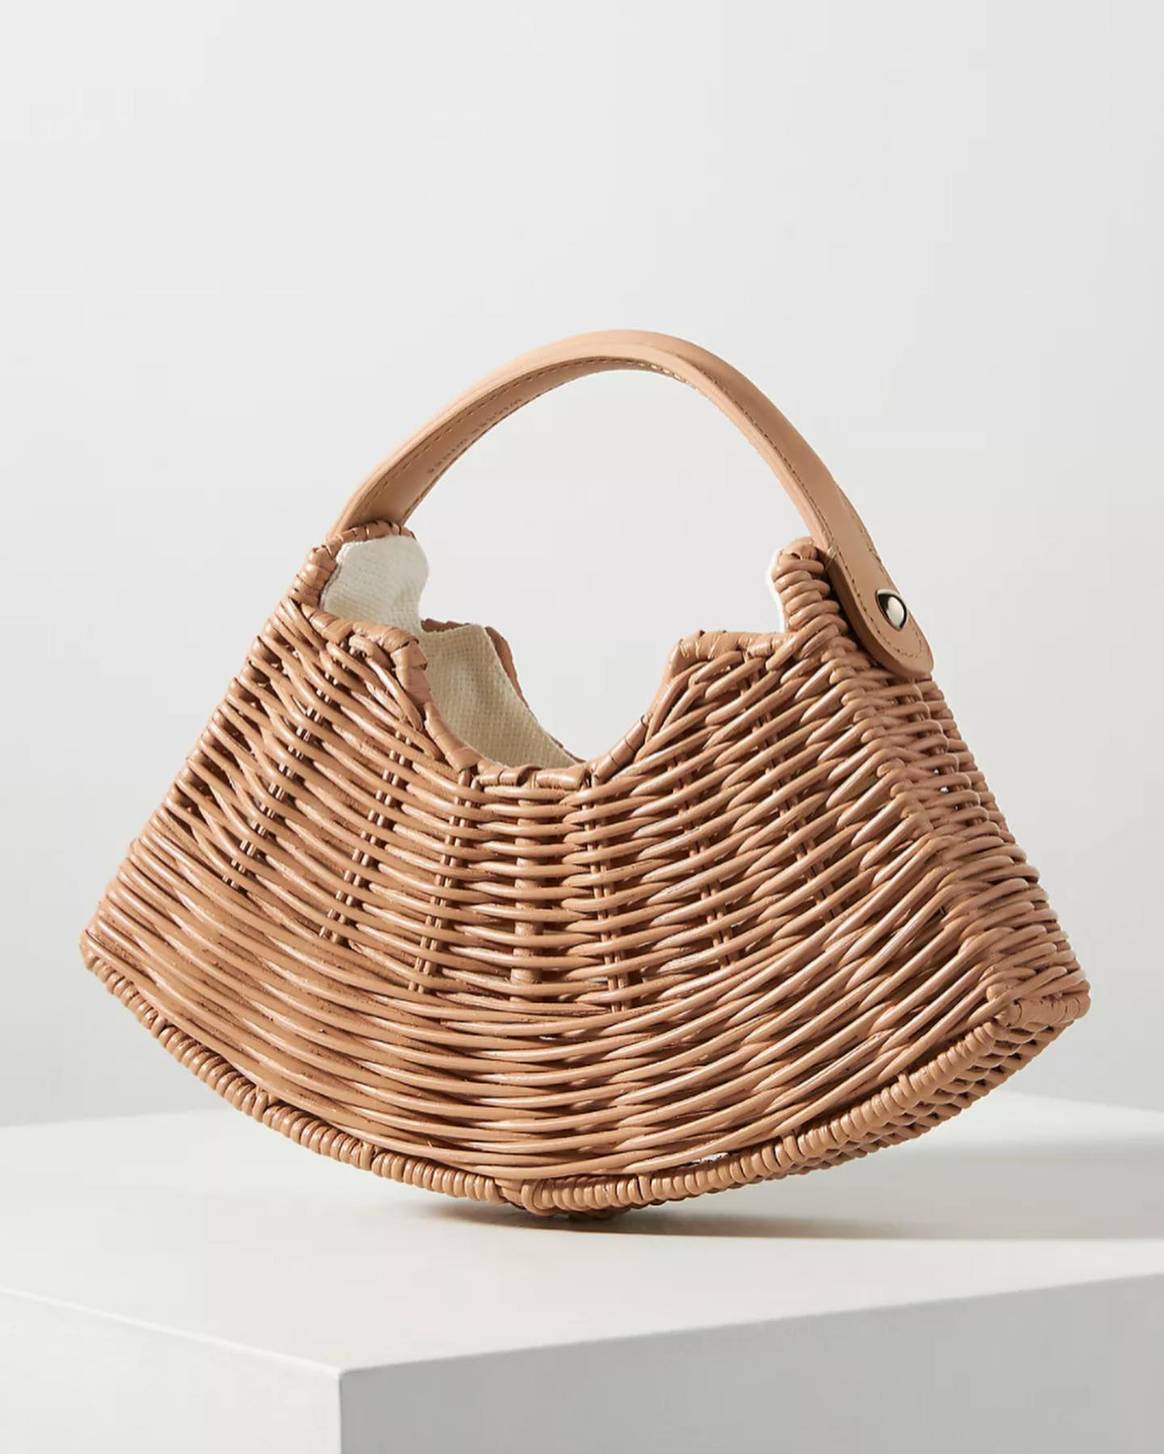 Wicker Wings, the Fan bag, official Facebook page of the brand